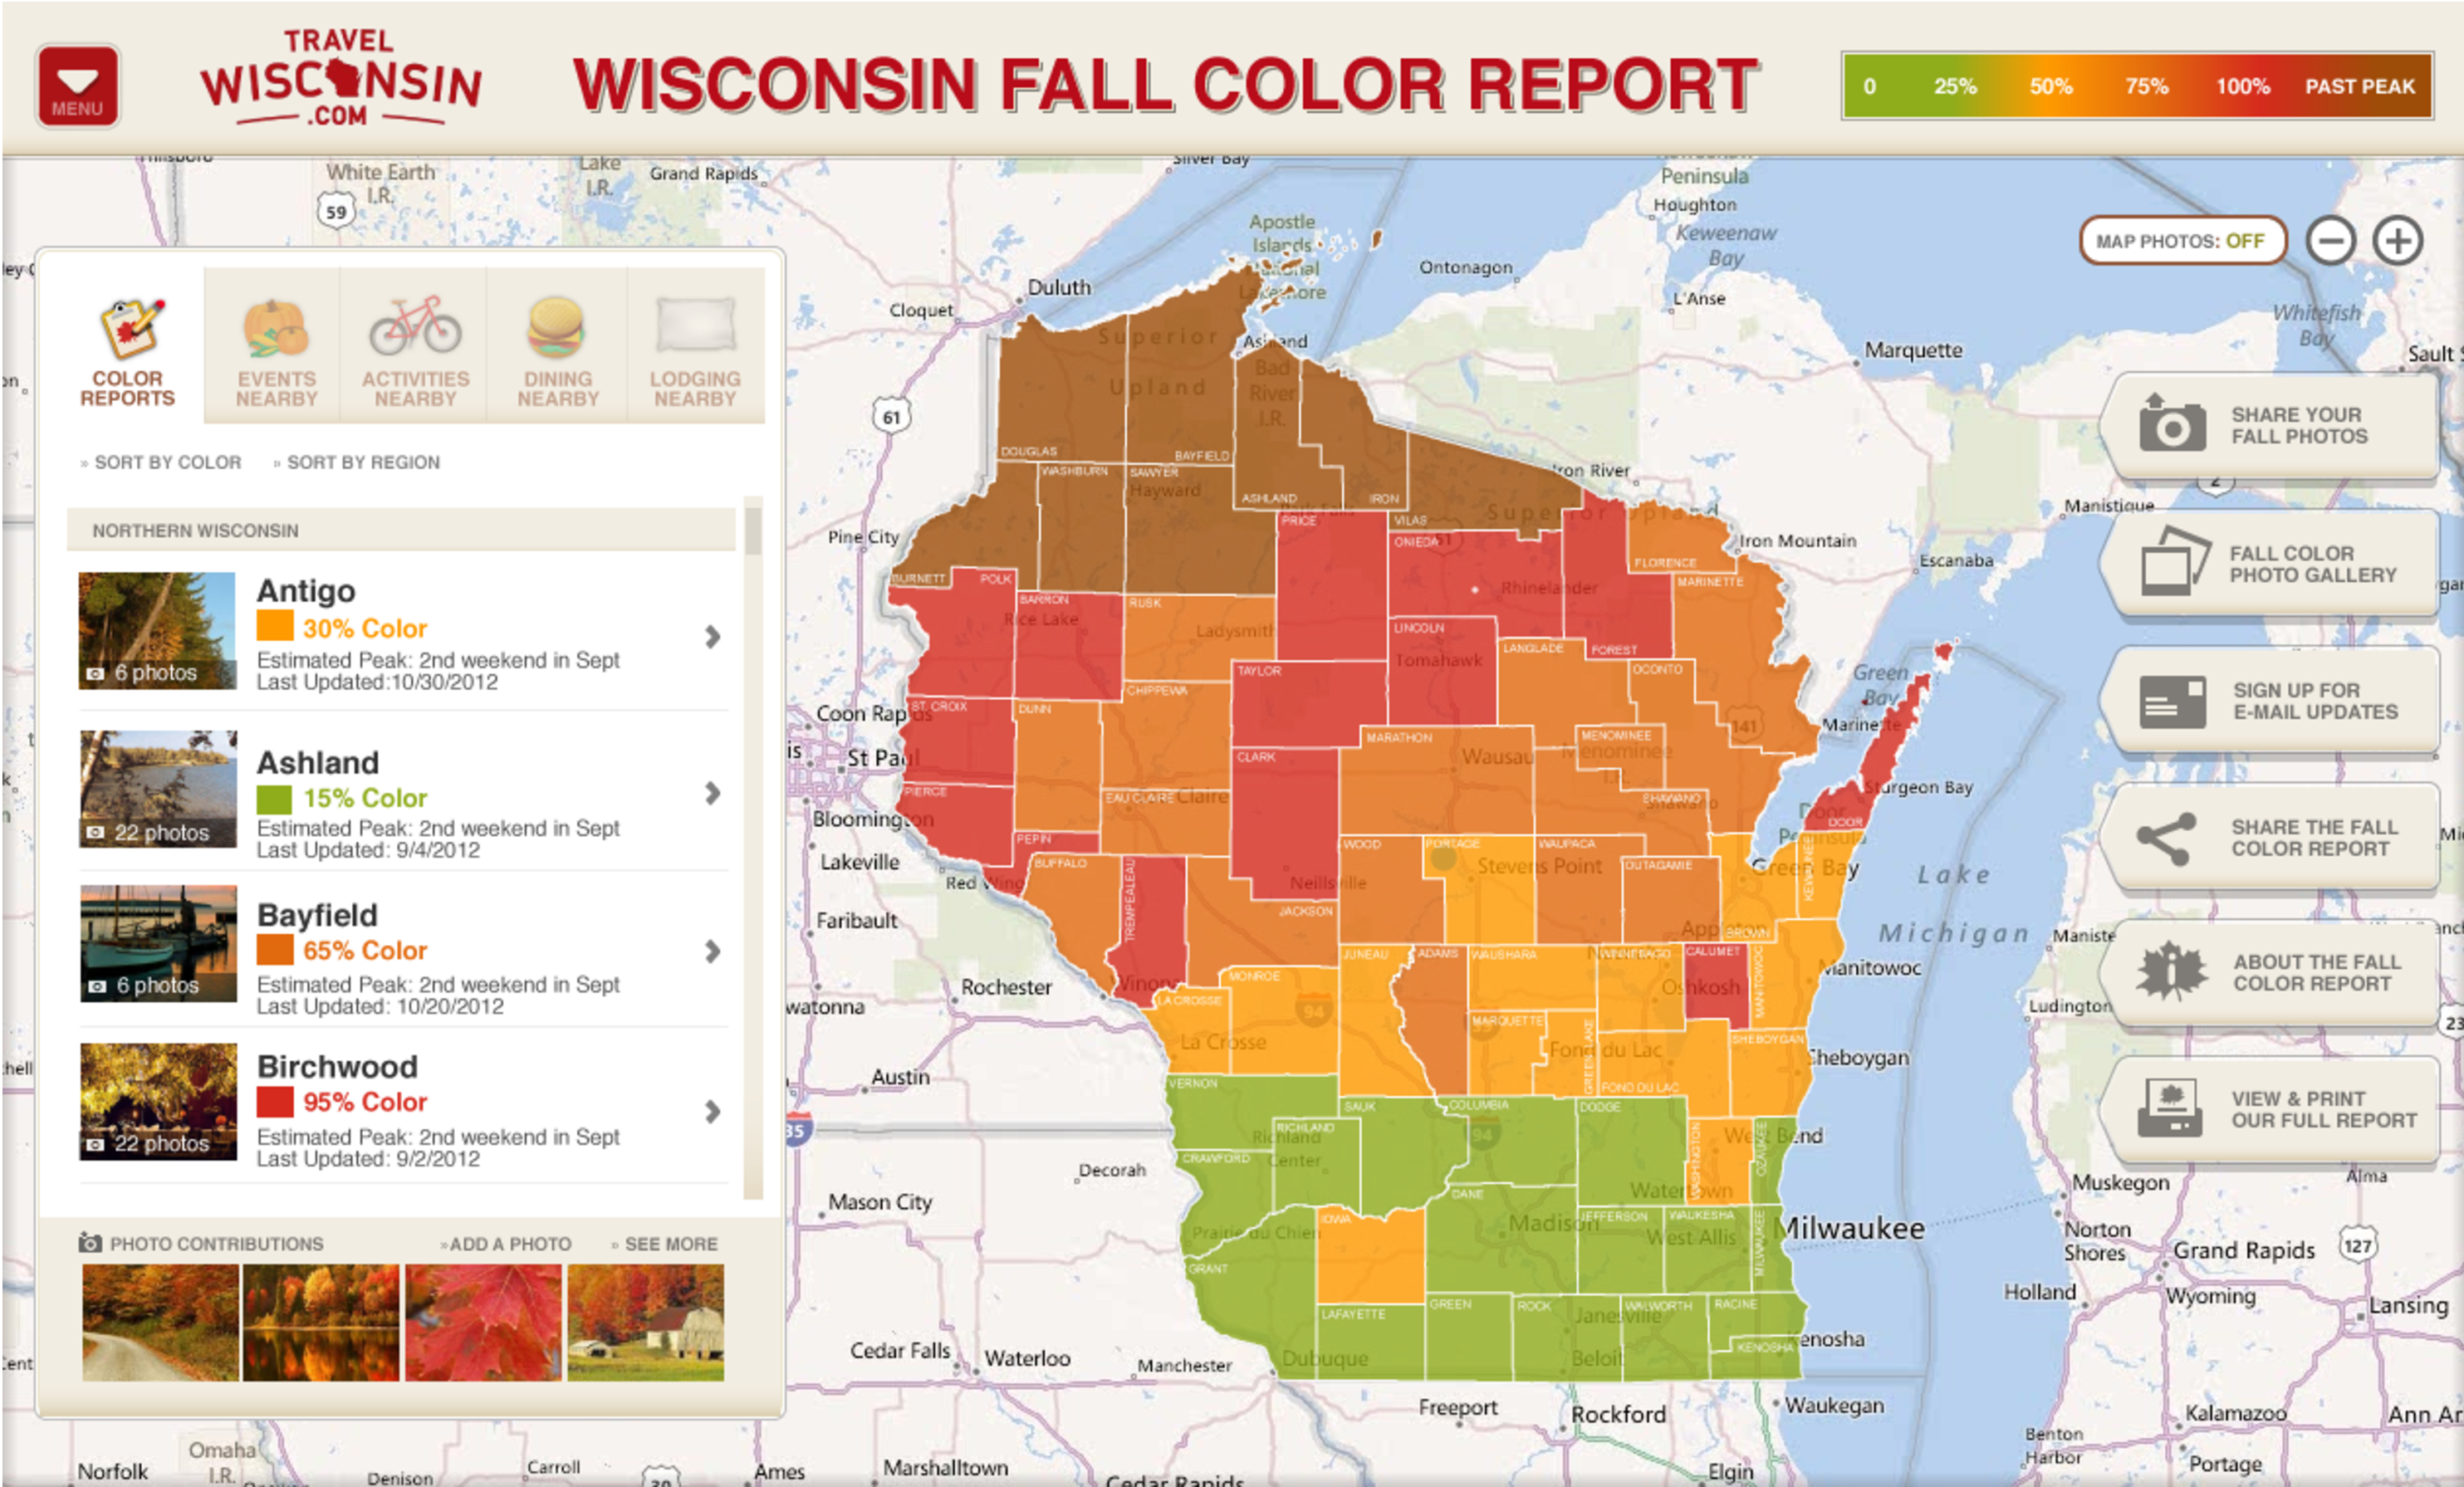 Travel Wisconsin Fall Color Report